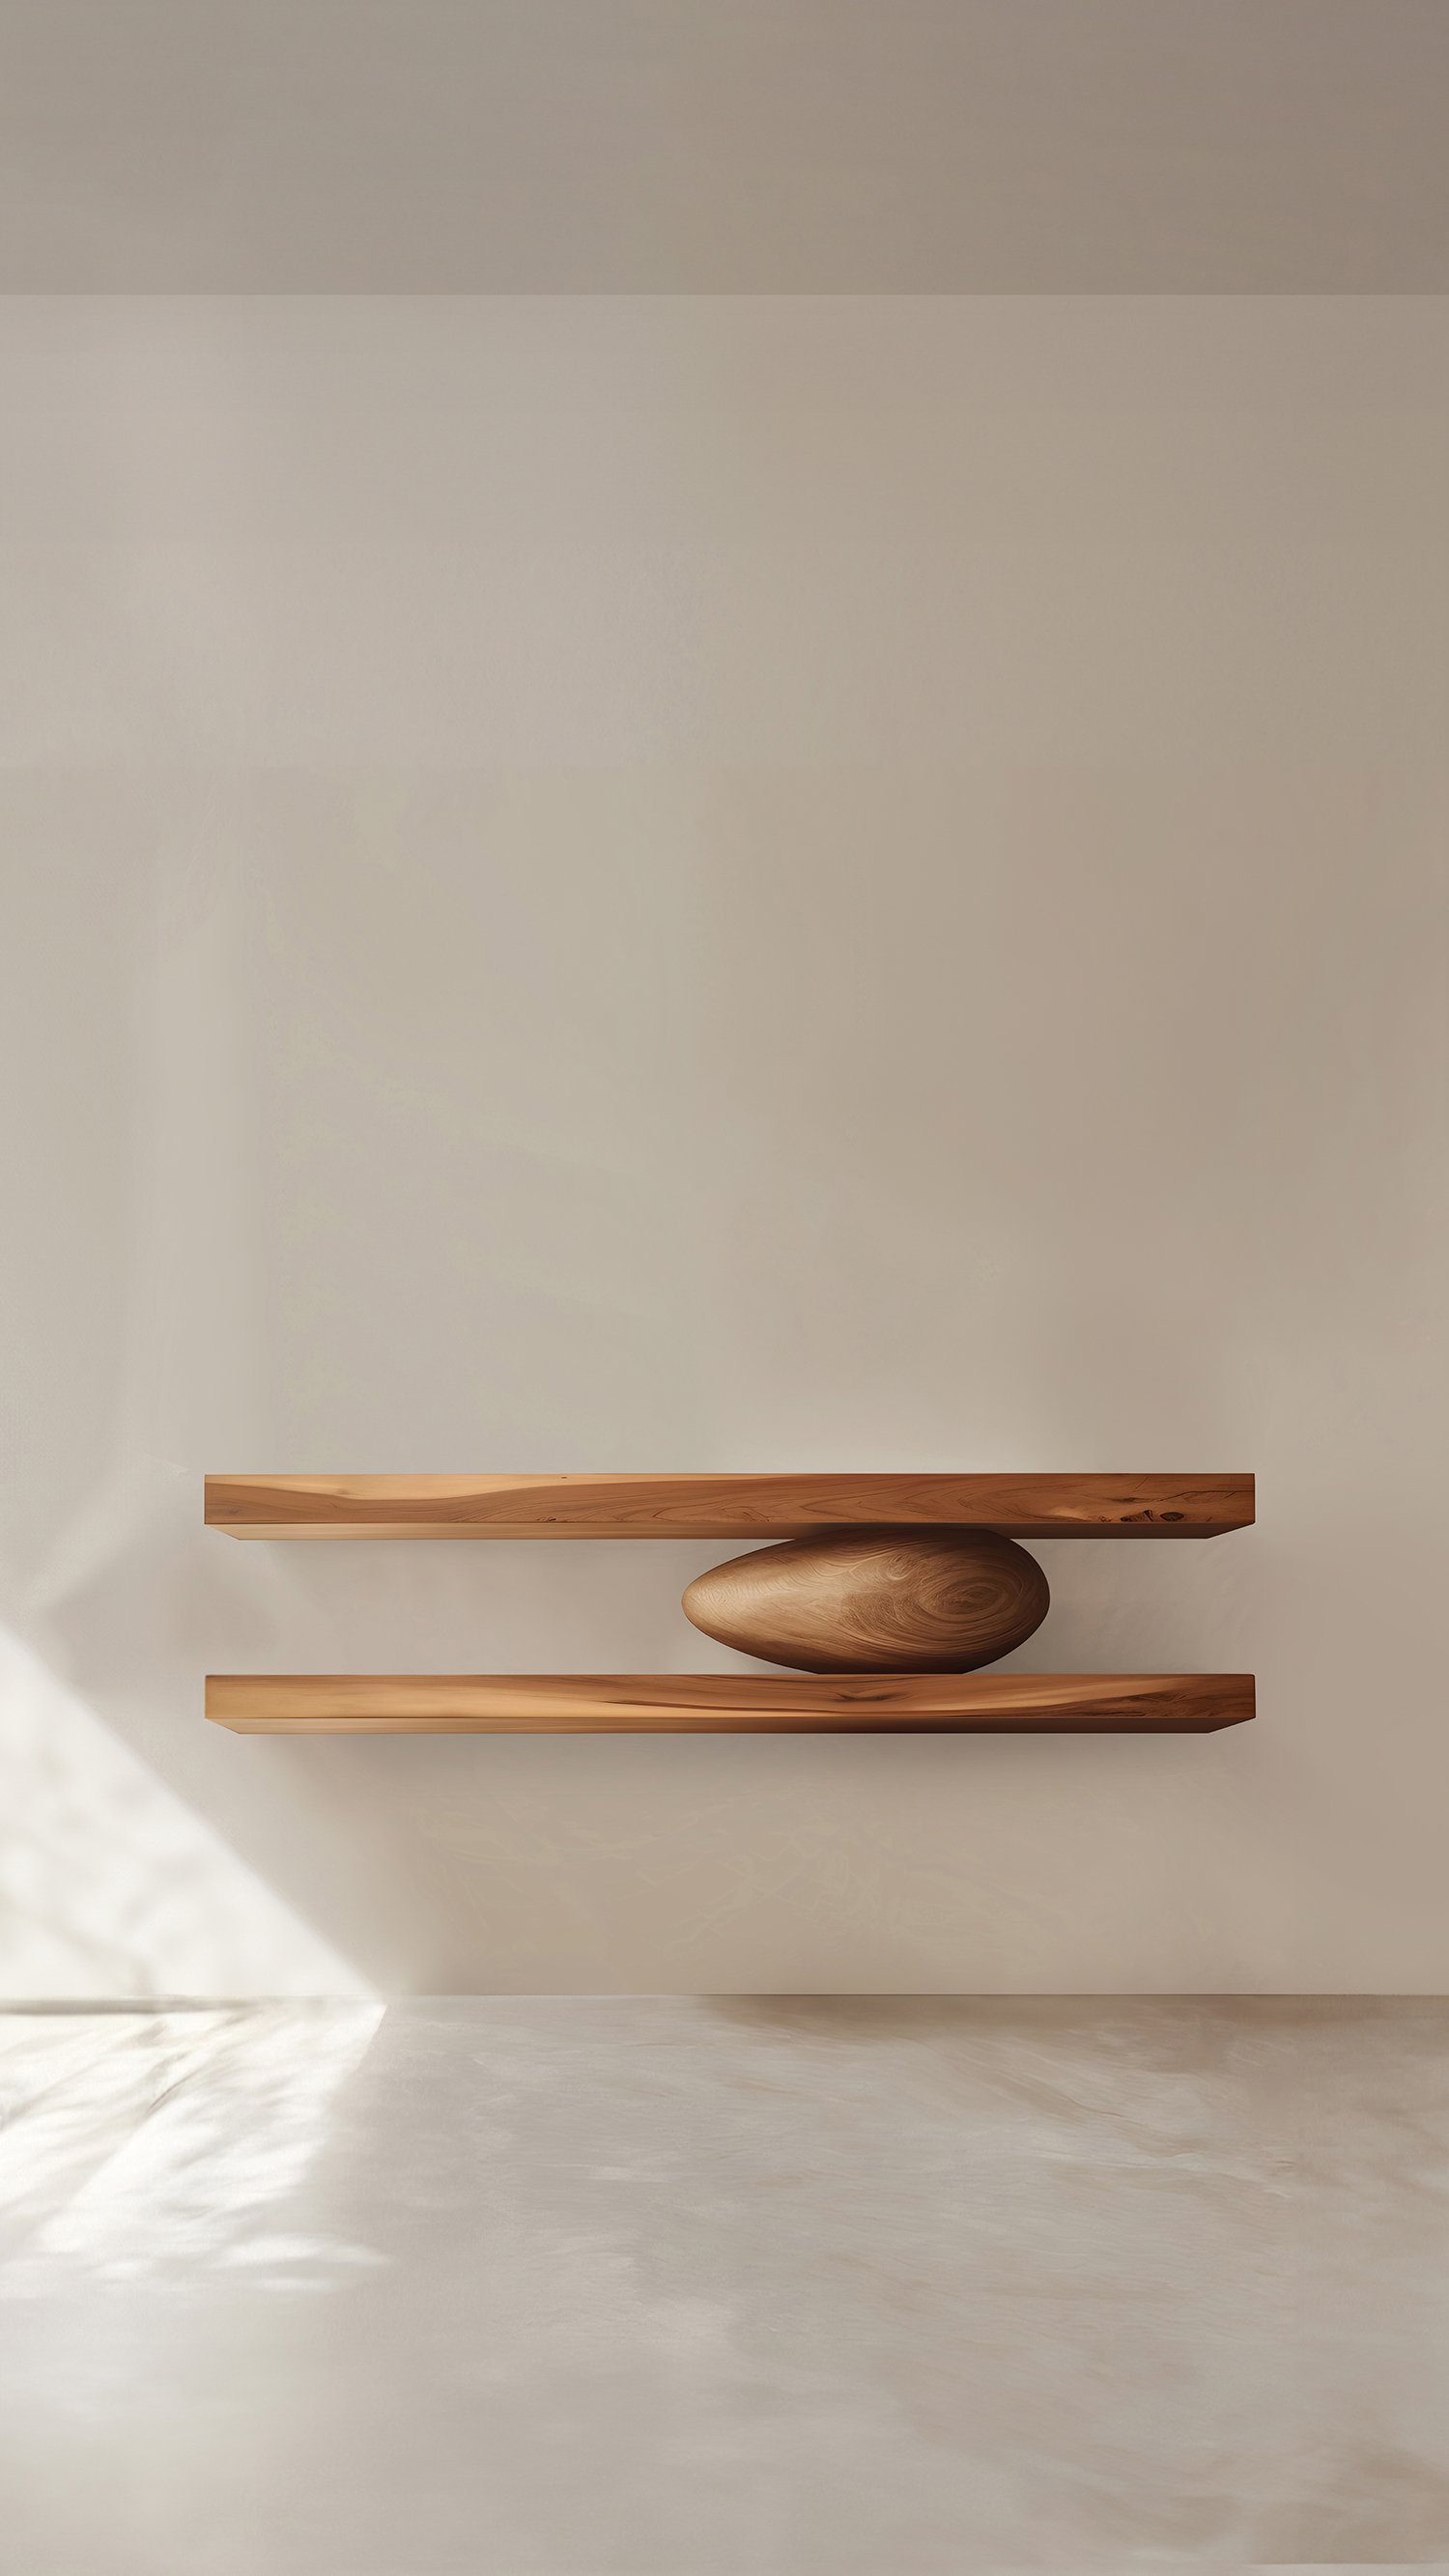 Set of Two Floating Shelves with One Sculptural Wooden Pebble Accent in the Middle, Sereno by Joel Escalona — 3.jpg